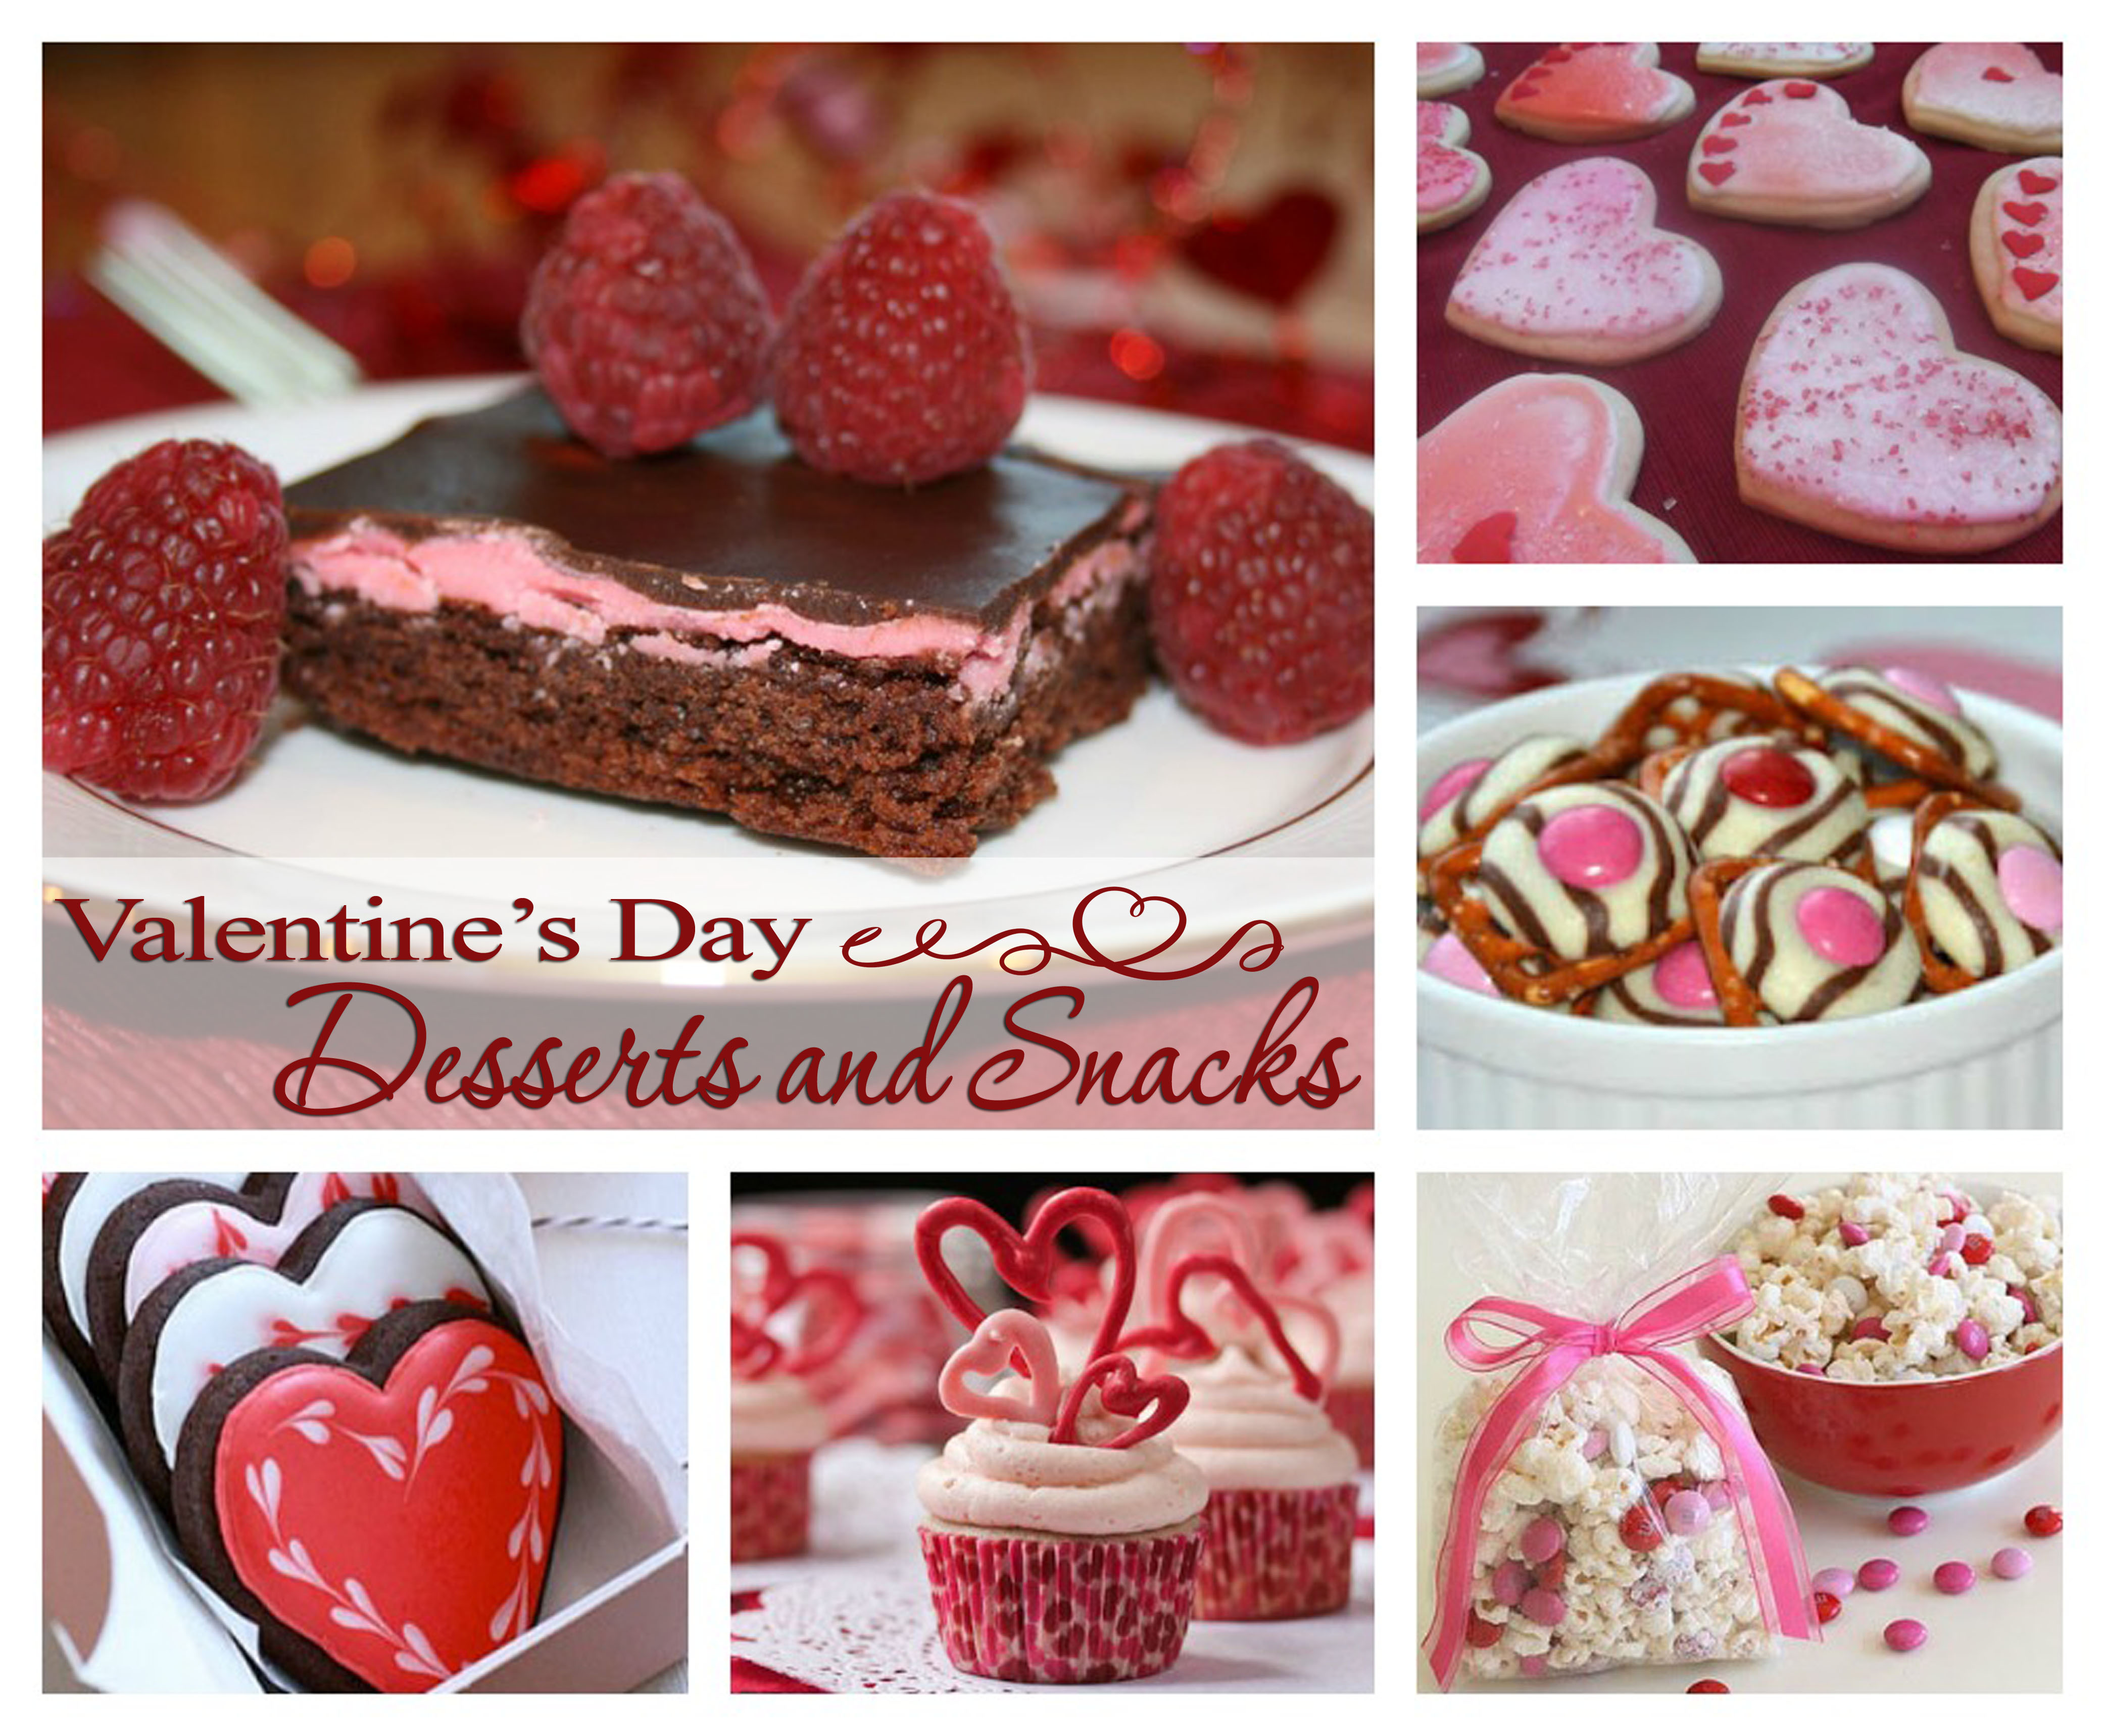 Valentine’s Day Dessert and Snack Ideas and Recipes | Celebrating Holidays